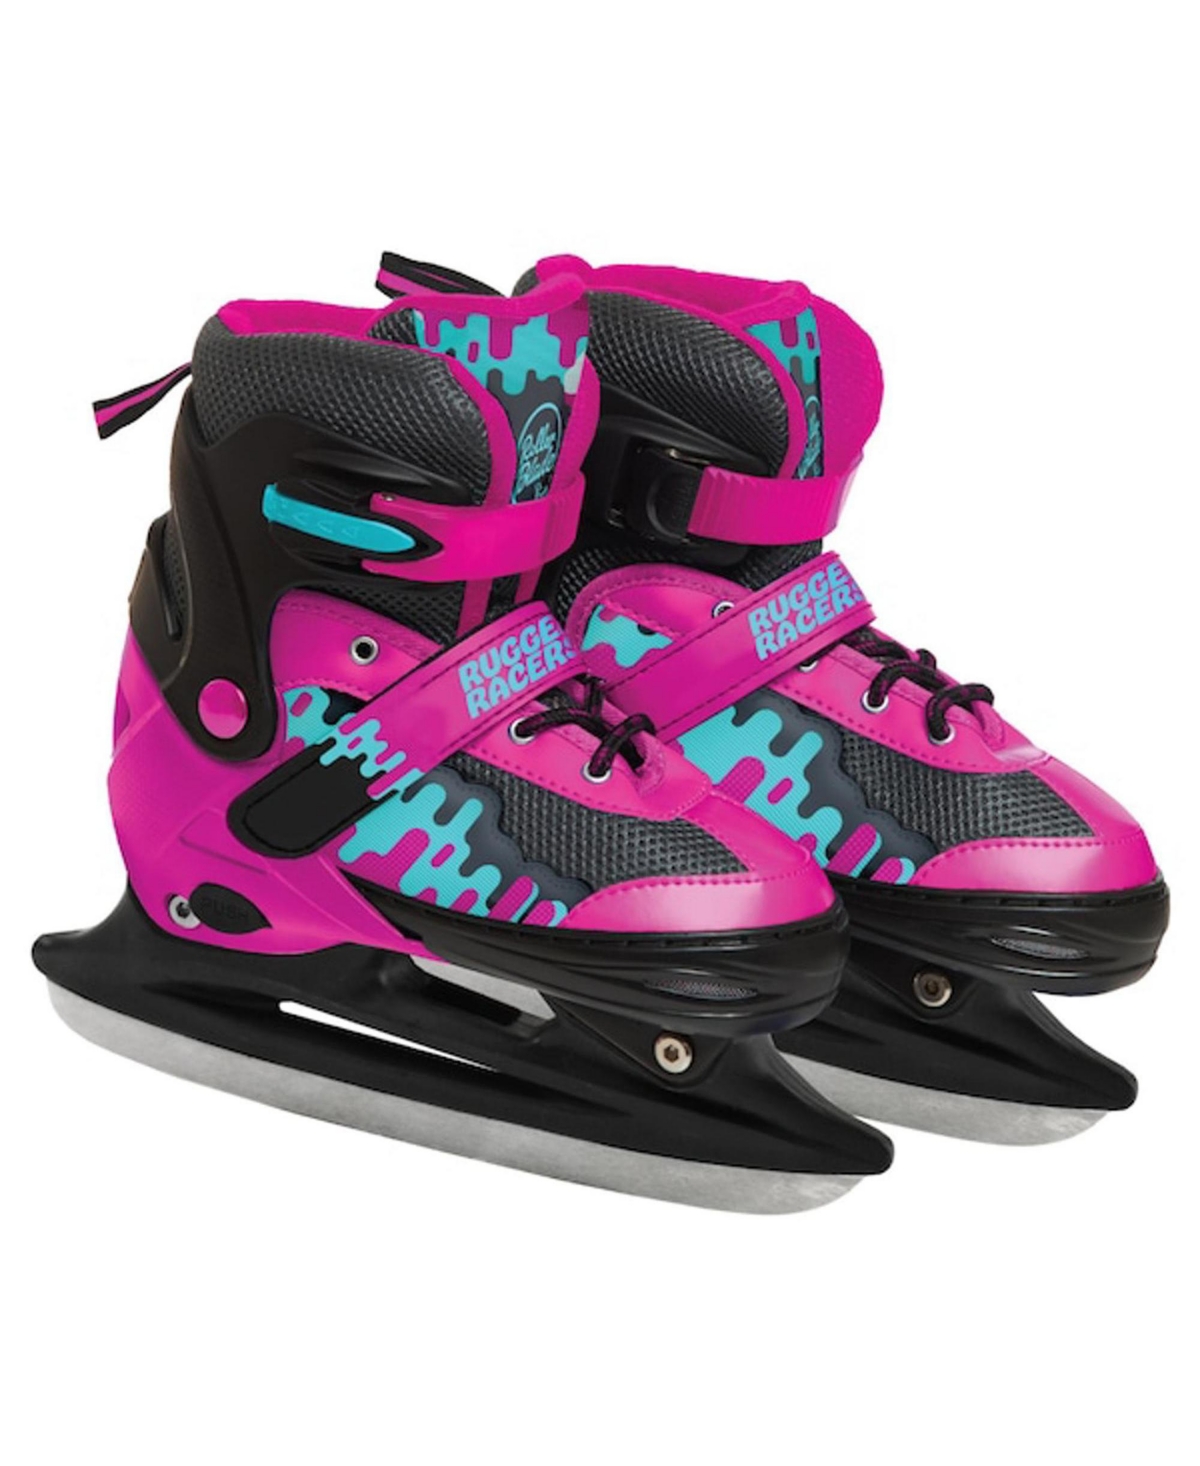 Shop Rugged Racers Kids Adjustable And Convertible Rollerblade And Ice Skate, Small In Pink